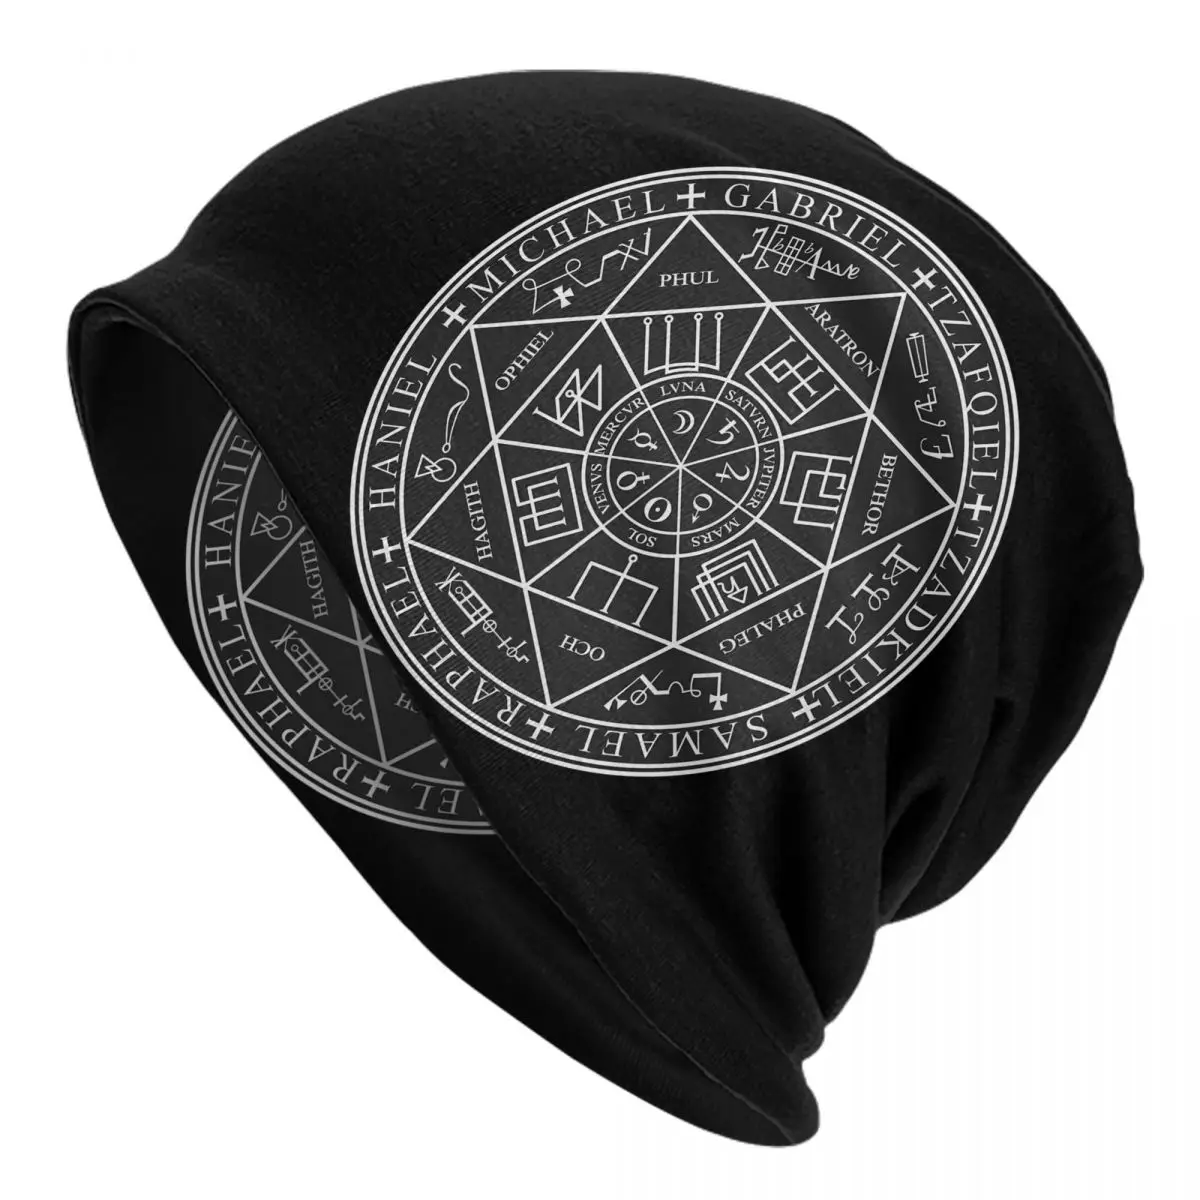 Seals Of The Seven Archangels Adult Men's Women's Knit Hat Keep warm winter Funny knitted hat